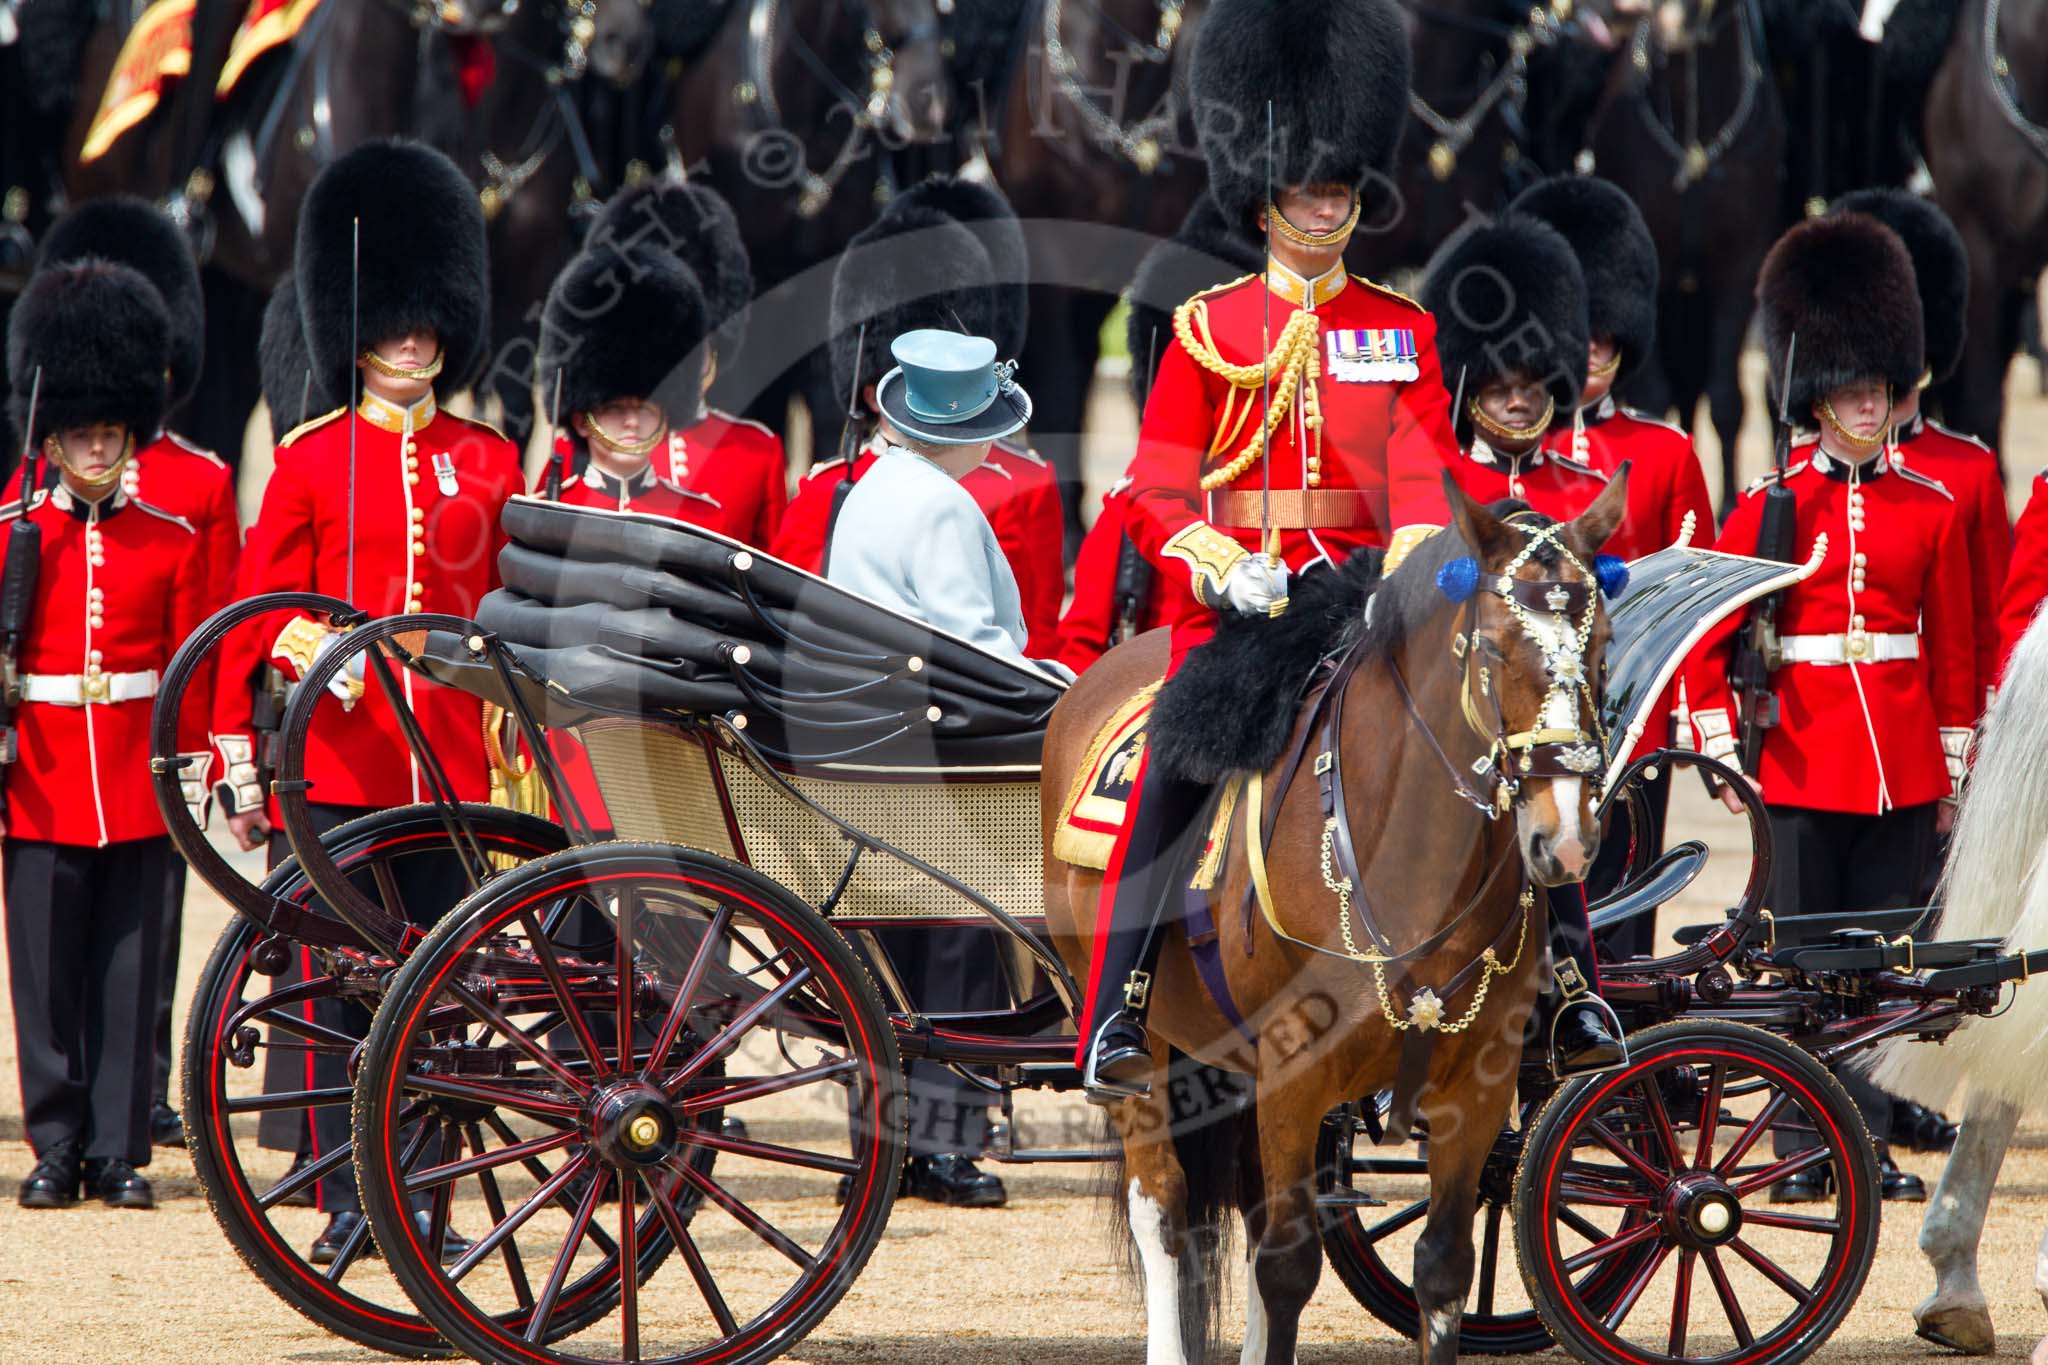 Trooping the Colour 2011: HM The Queen, in the ivory mounted phaeton, during the Inspection of the Line. In the foreground the Field Officer of the parade, Lieuteant Colonel Lincoln P M Jopp, Scots Guards..
Horse Guards Parade, Westminster,
London SW1,
Greater London,
United Kingdom,
on 11 June 2011 at 11:03, image #156